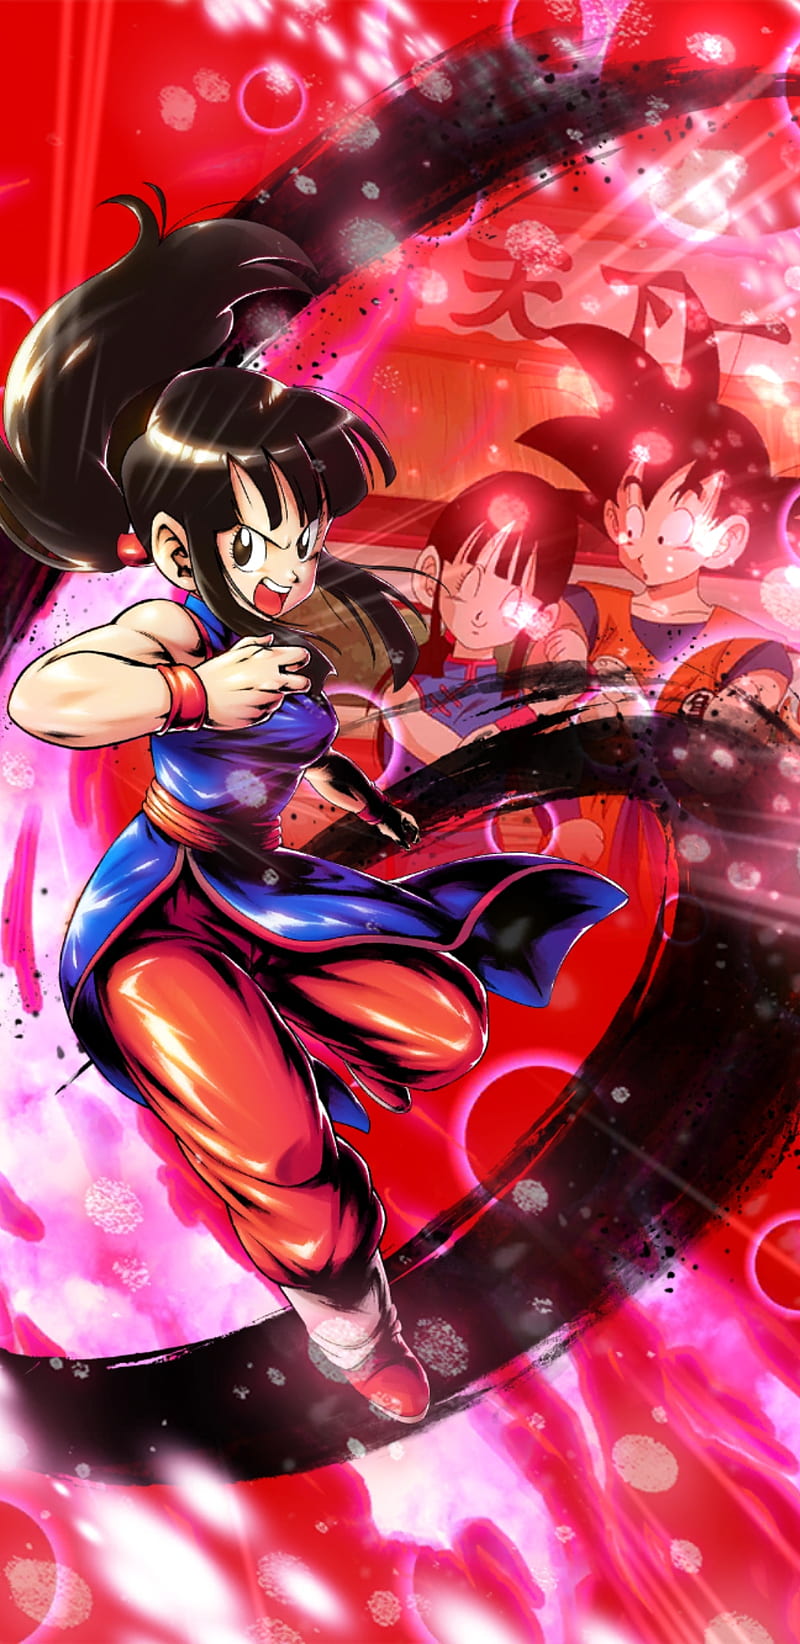 ChiChi Dragon Ball HD Wallpapers and Backgrounds